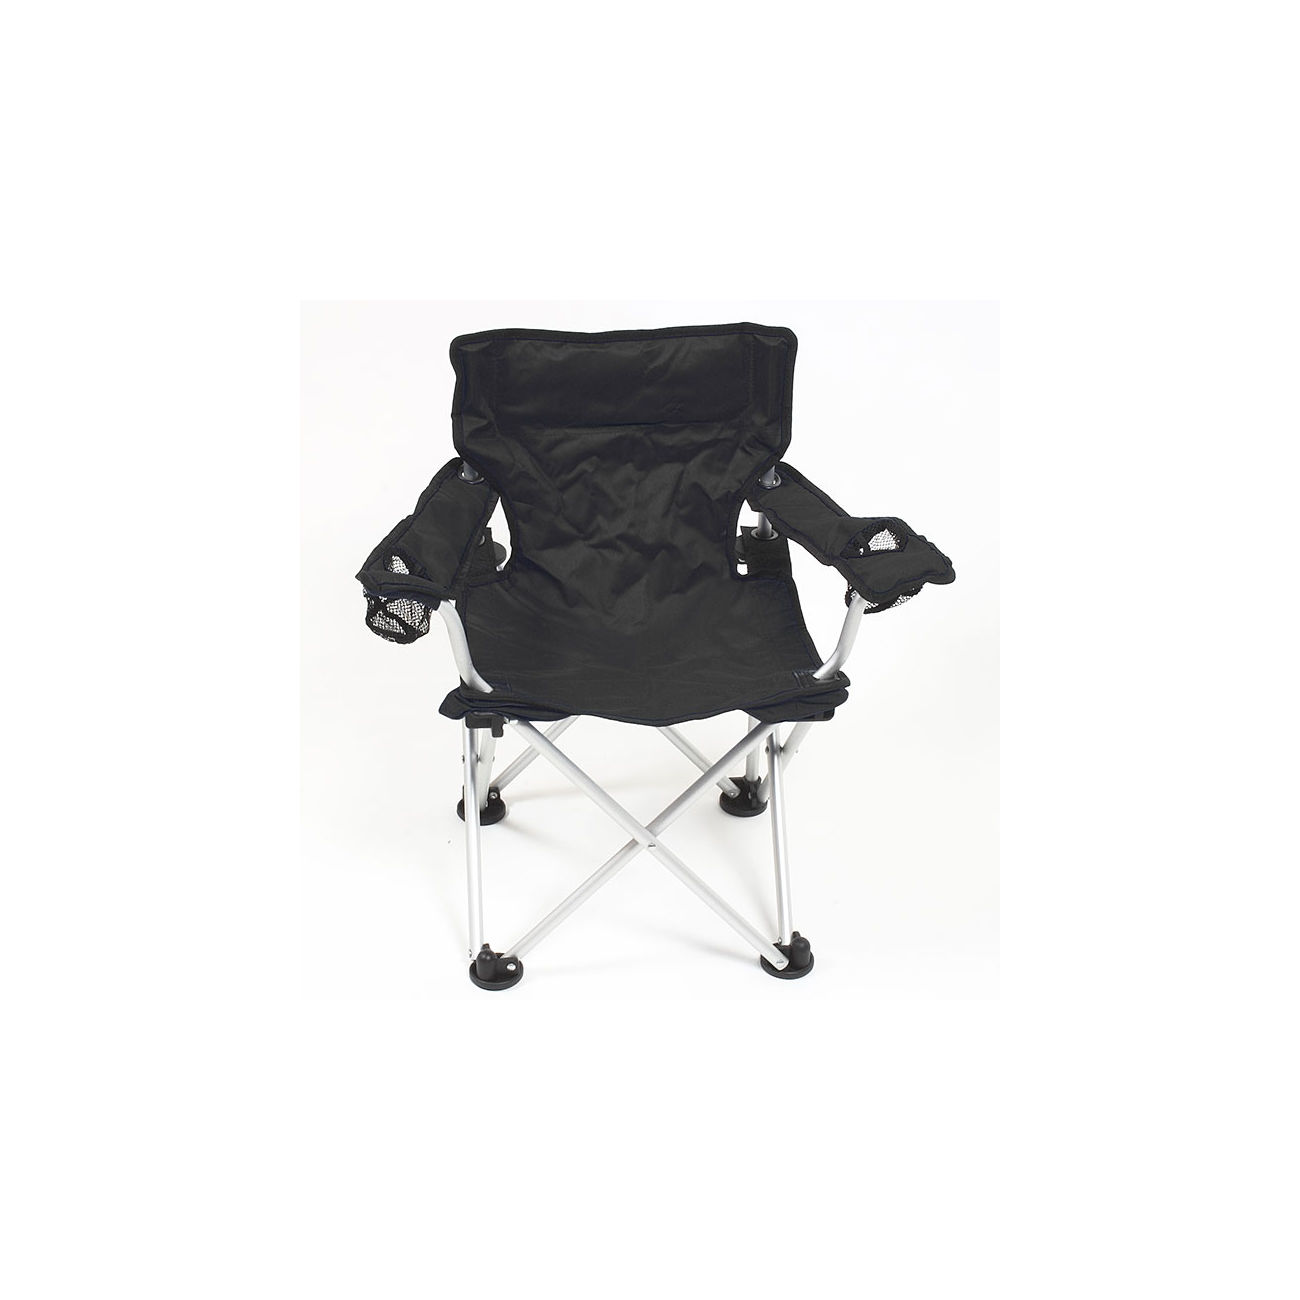 Mil-Tec RELAX SESSEL OLIV Stuhl Camping Outdoor 